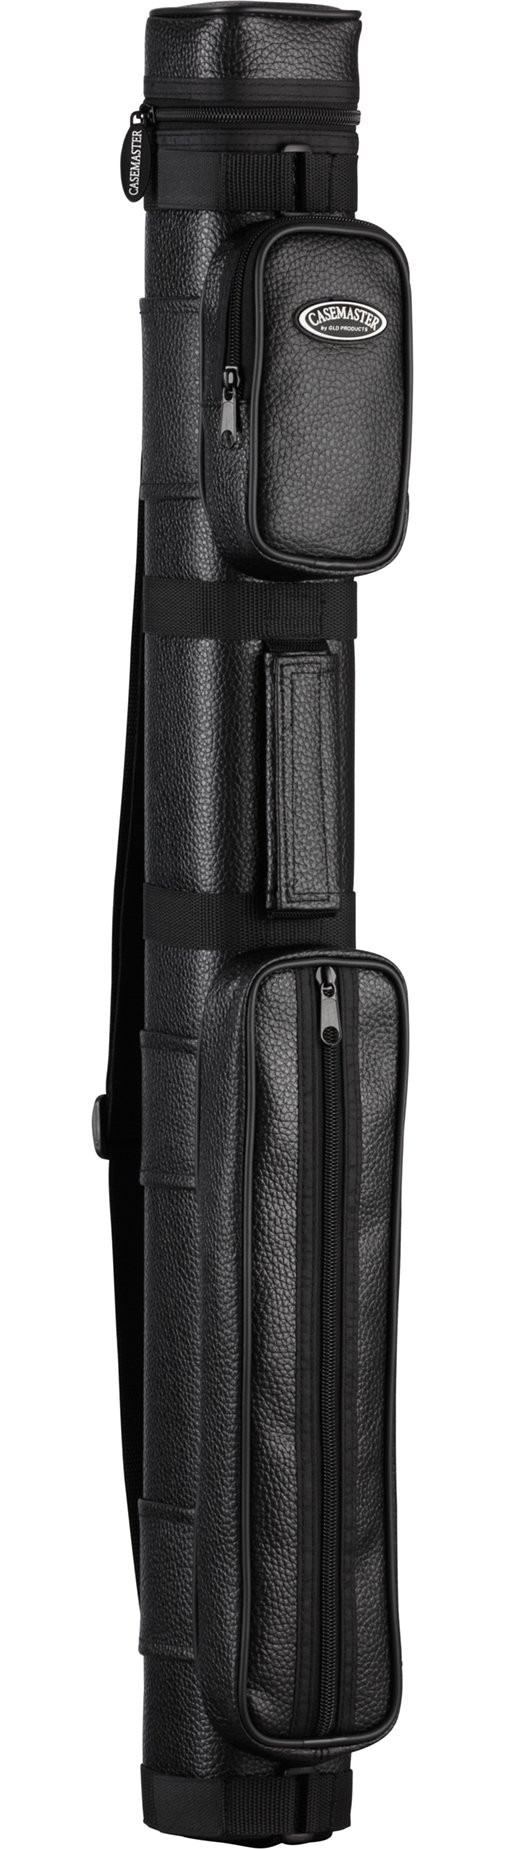 Casemaster by GLD Products Q-Vault Classic Billiard/Pool Cue Hard Case, Holds 2 Complete 2-Piece Cues (2 Butt/2 Shaft), Black